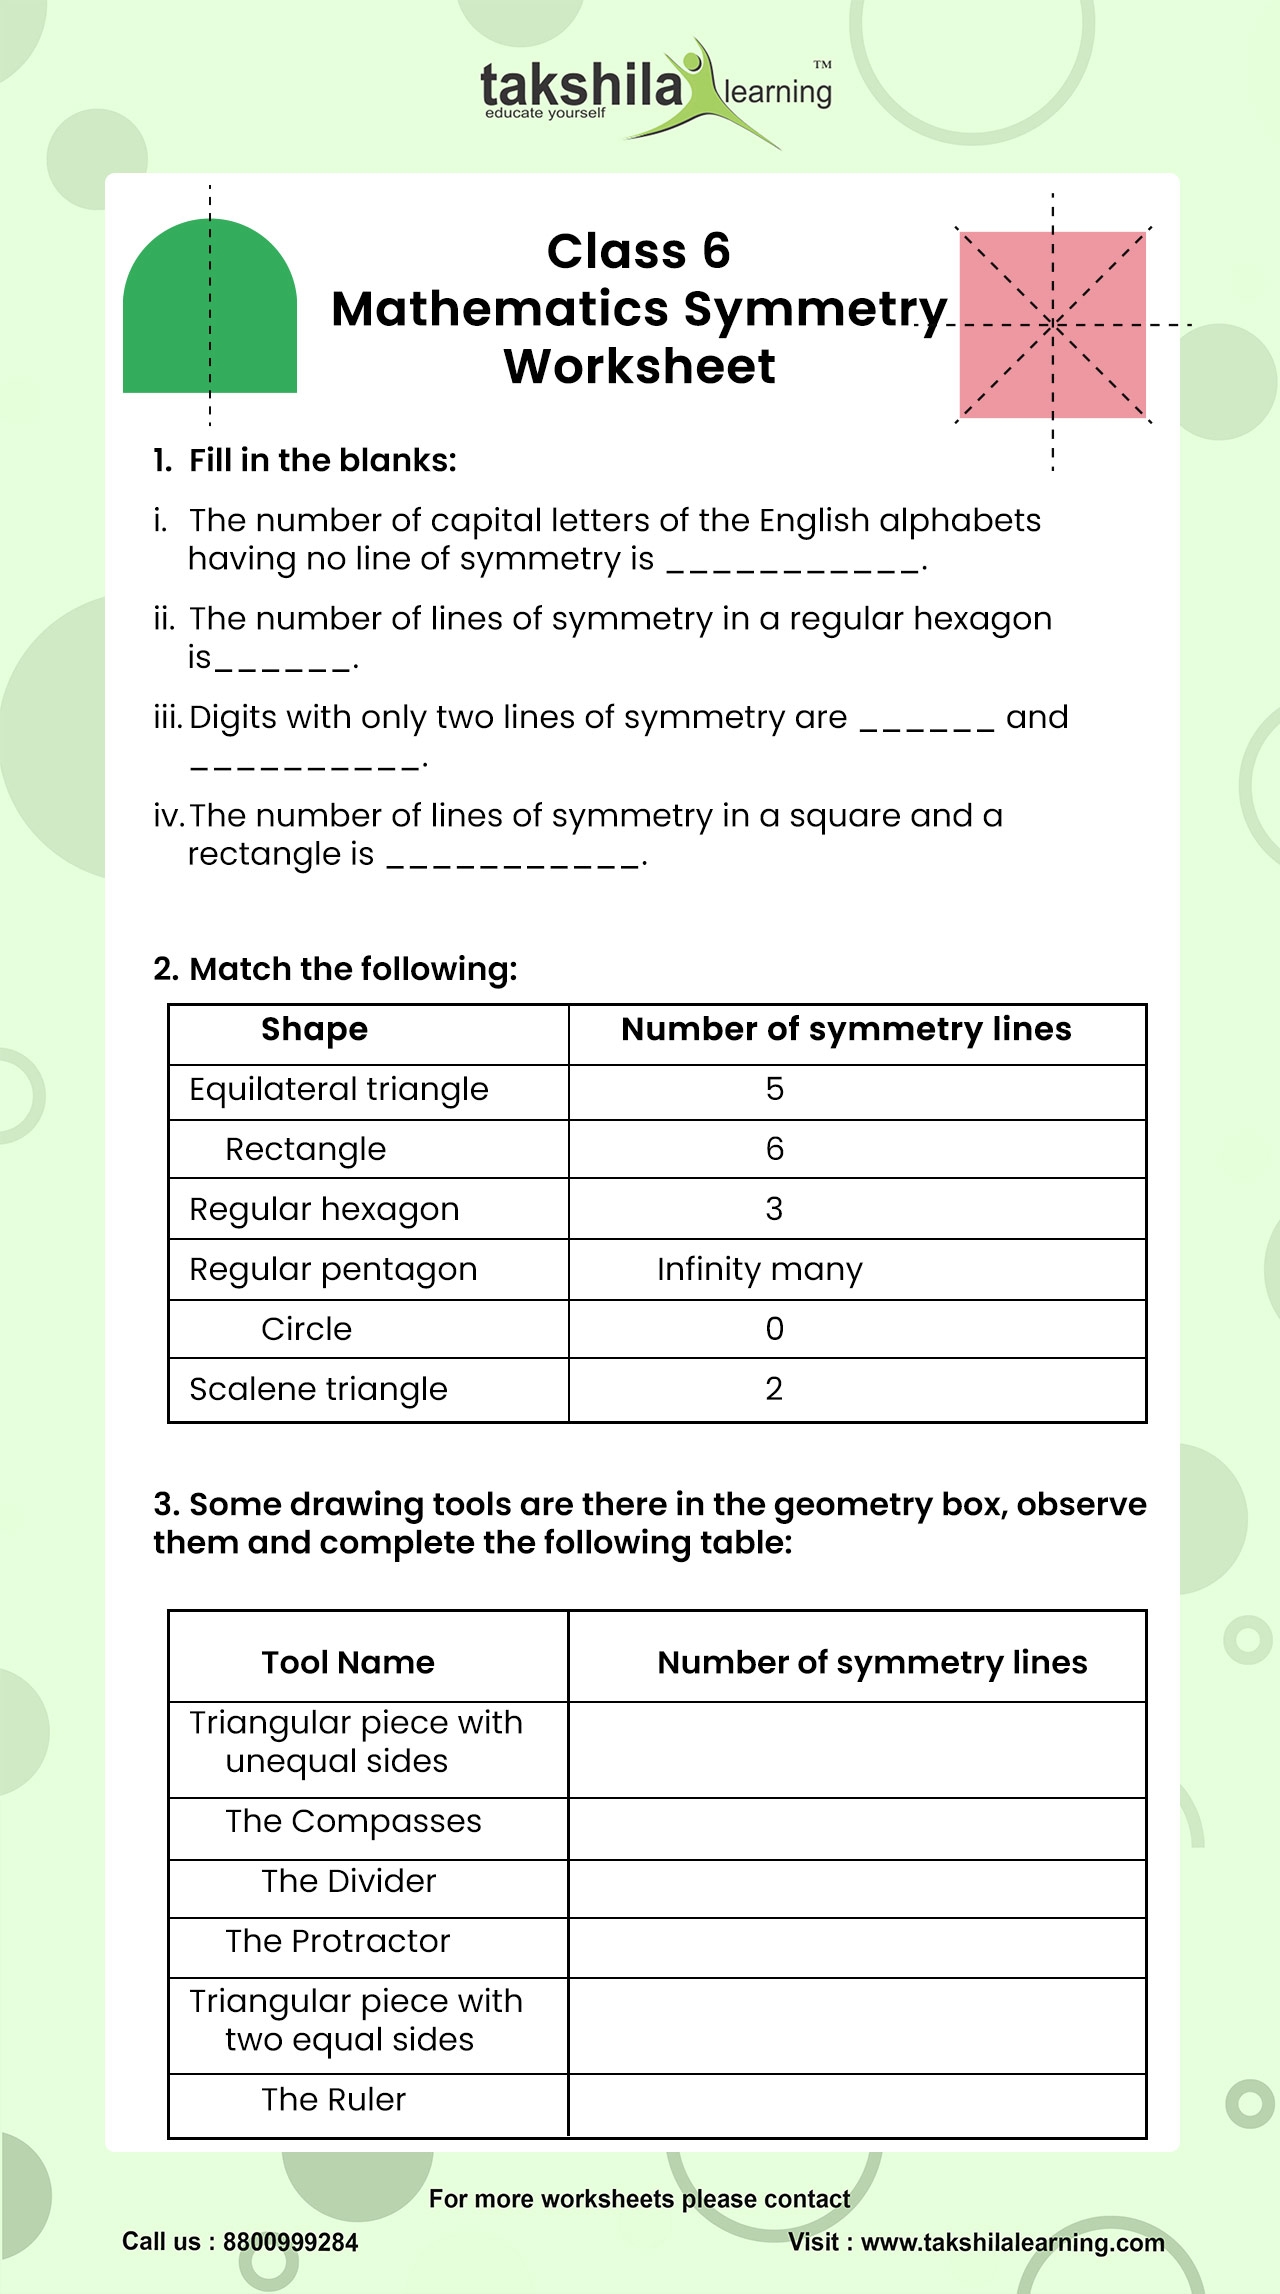 class-6-maths-symmetry-worksheets-with-answers-cbse-icse-math-worksheet-answers